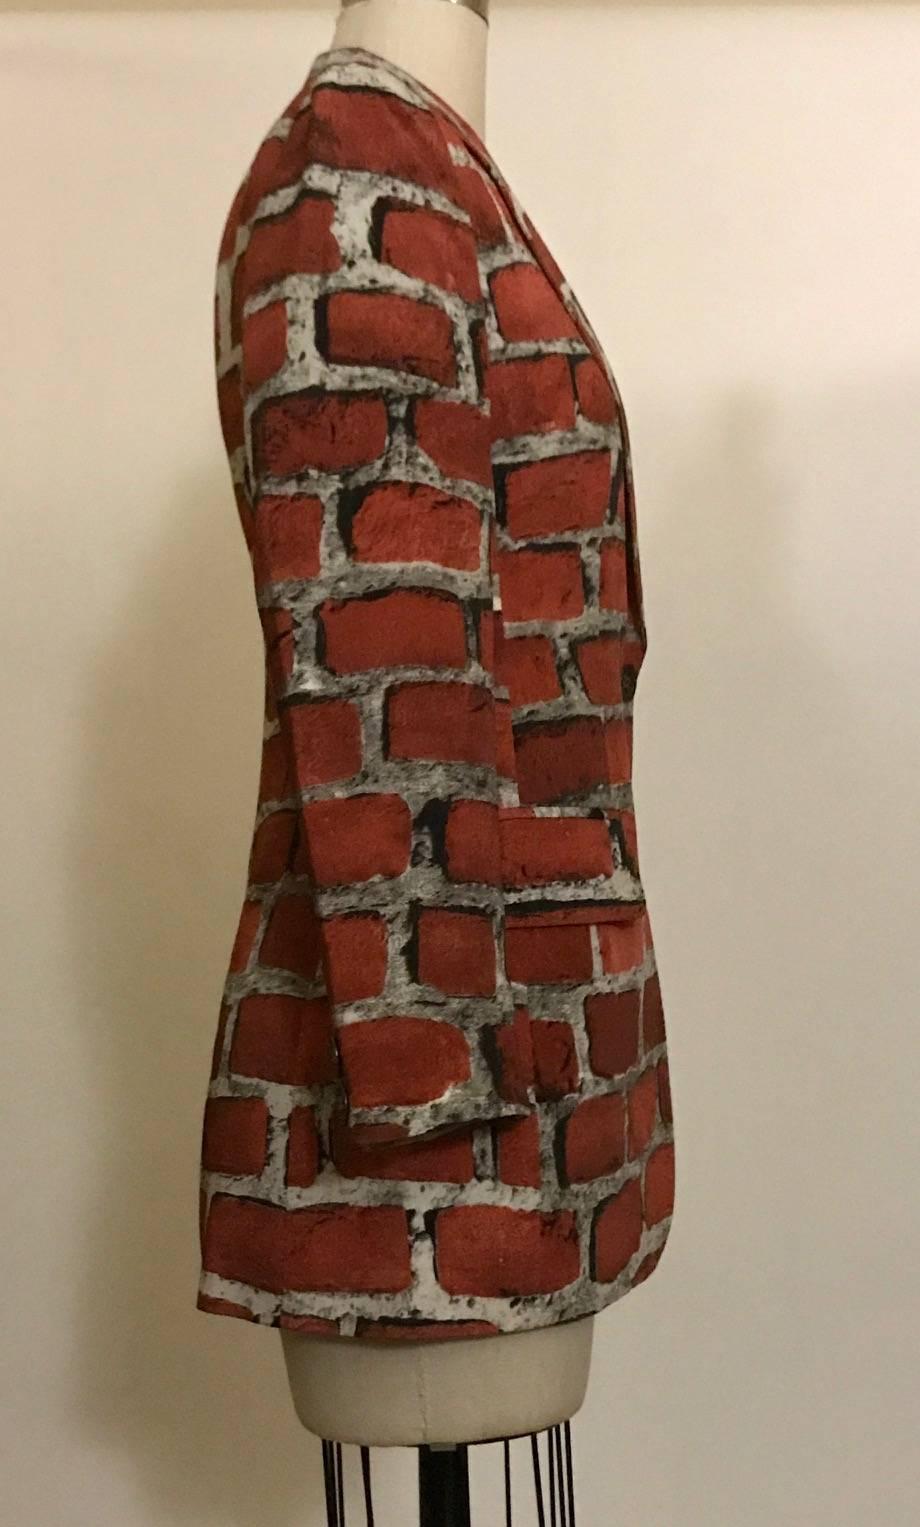 Moschino Couture brick print jacket from the 1997 collection. Orange red bricks on a grey cement background. Buttons at front and cuffs.

90% acetate, 10% silk.
Fully lined in 60% acetate, 40% rayon.

Made in Italy.

Labelled size IT 40, US 6. Best